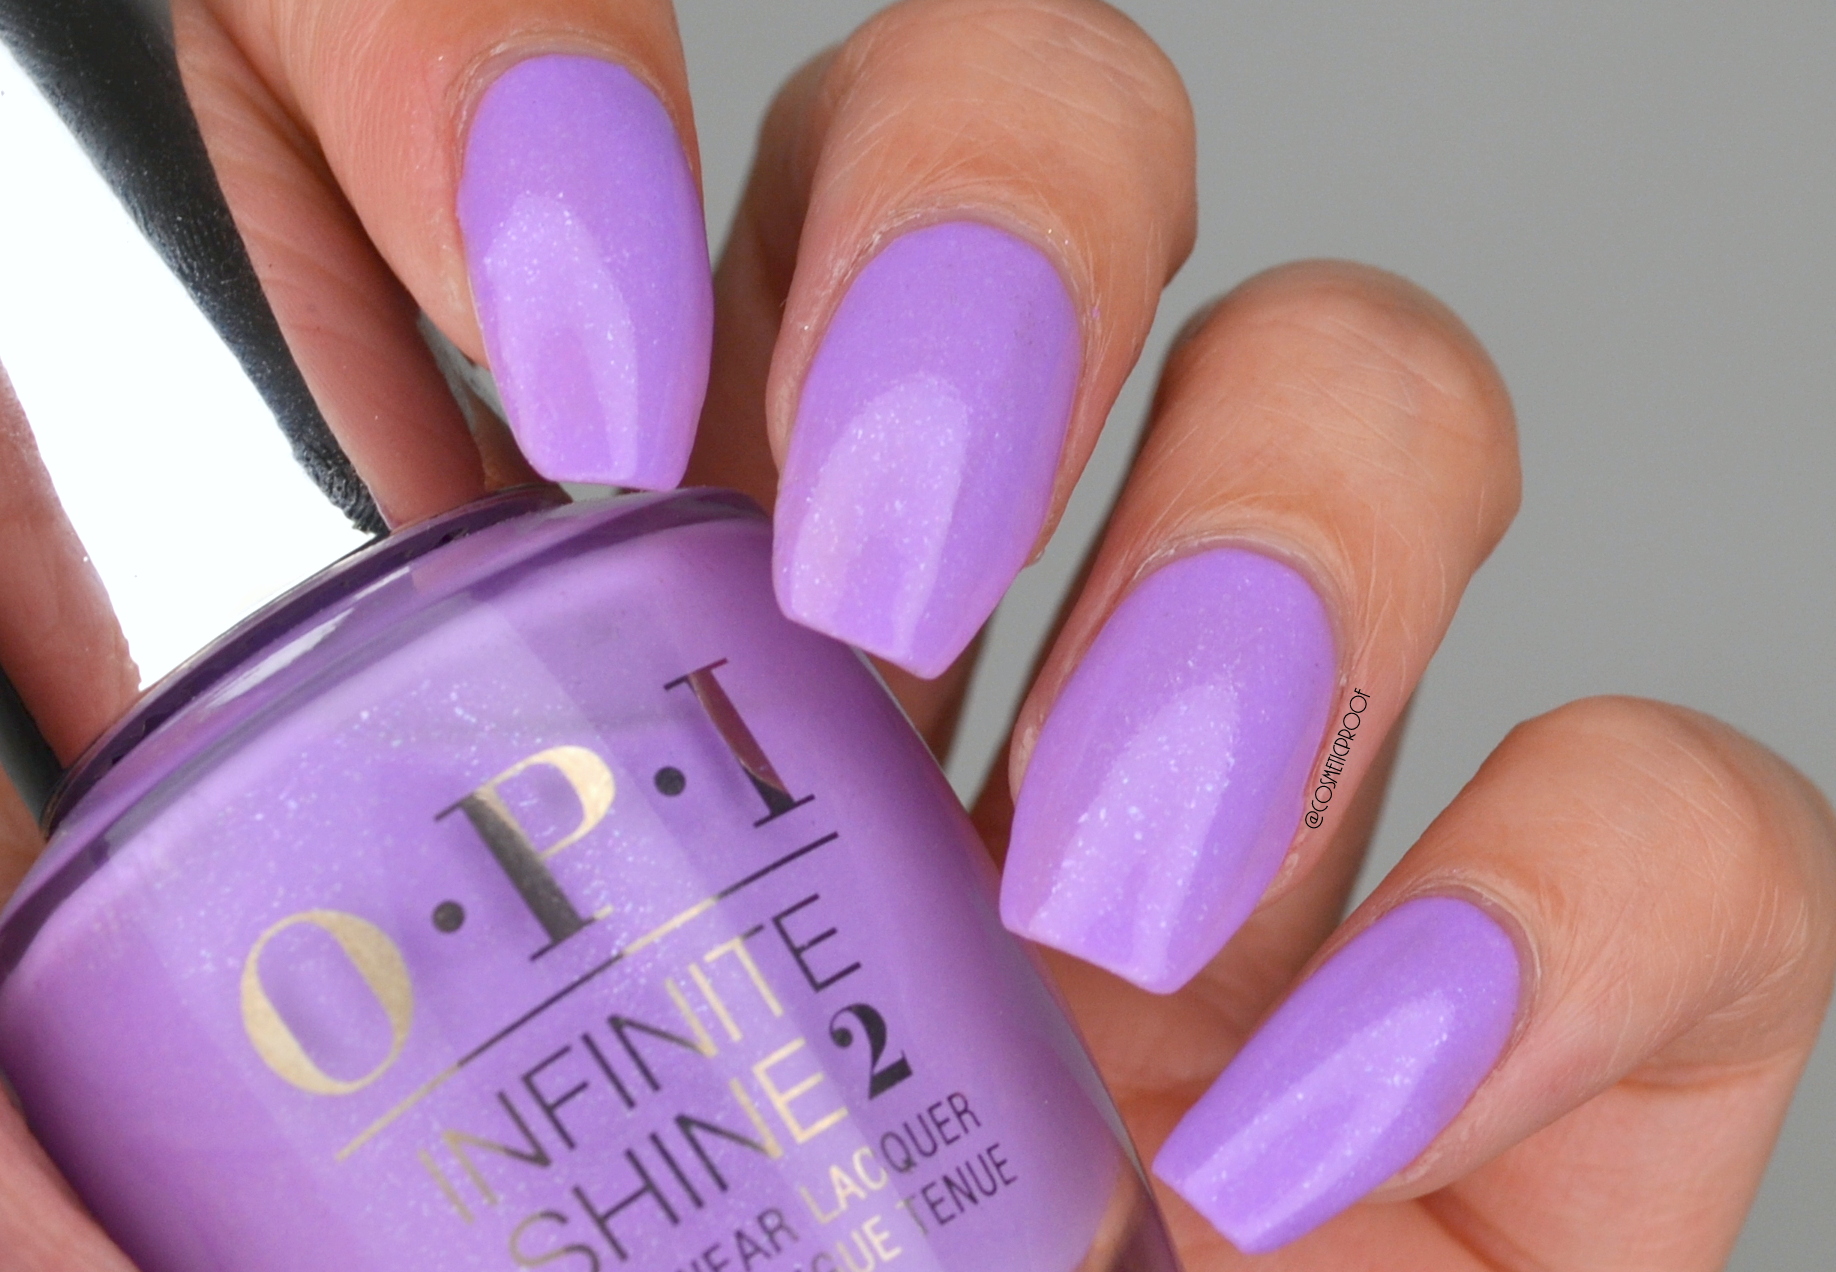 8. OPI Infinite Shine in "Sun, Sea, and Sand in My Pants" - wide 5